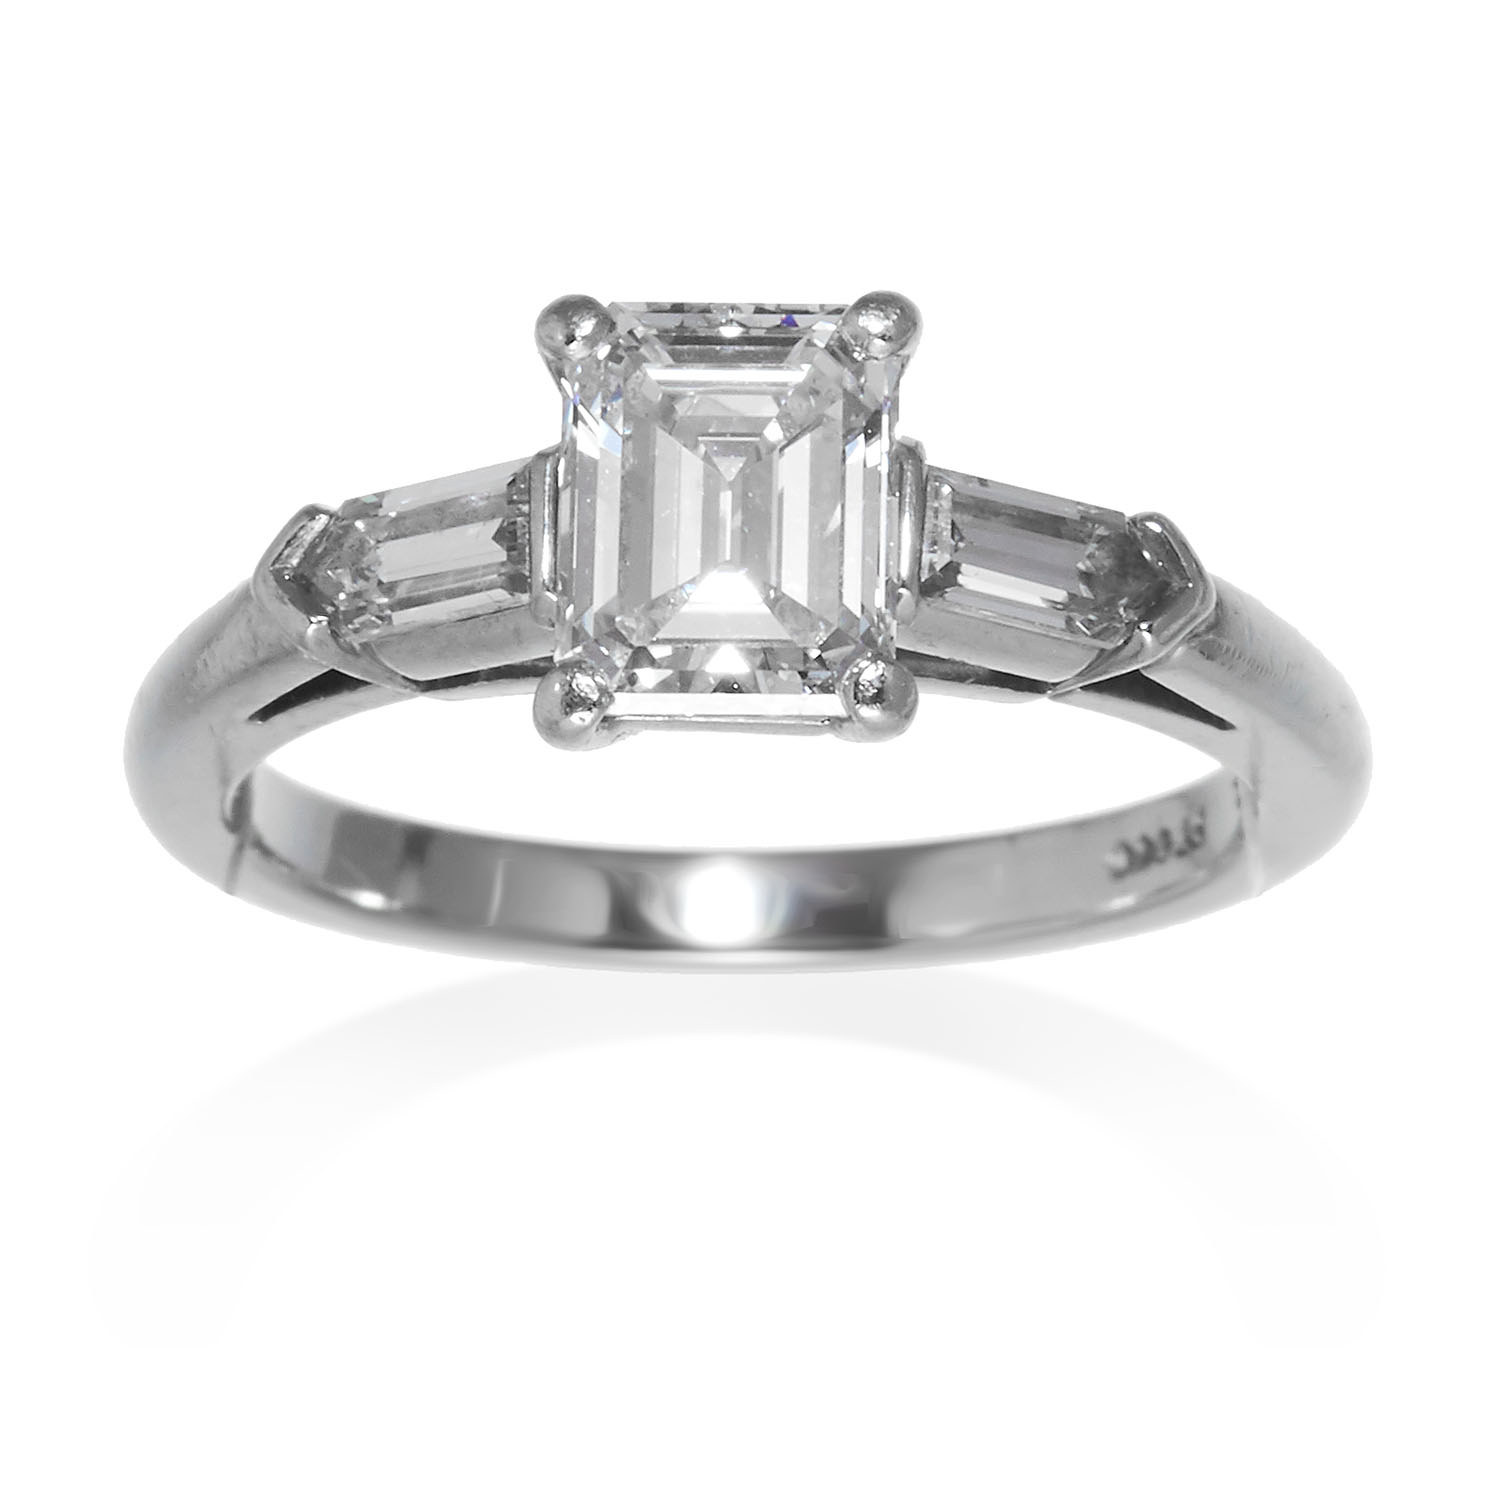 A 1.03CT DIAMOND SOLITAIRE ENGAGEMENT RING, TIFFANY & CO in platinum, set with a central emerald cut